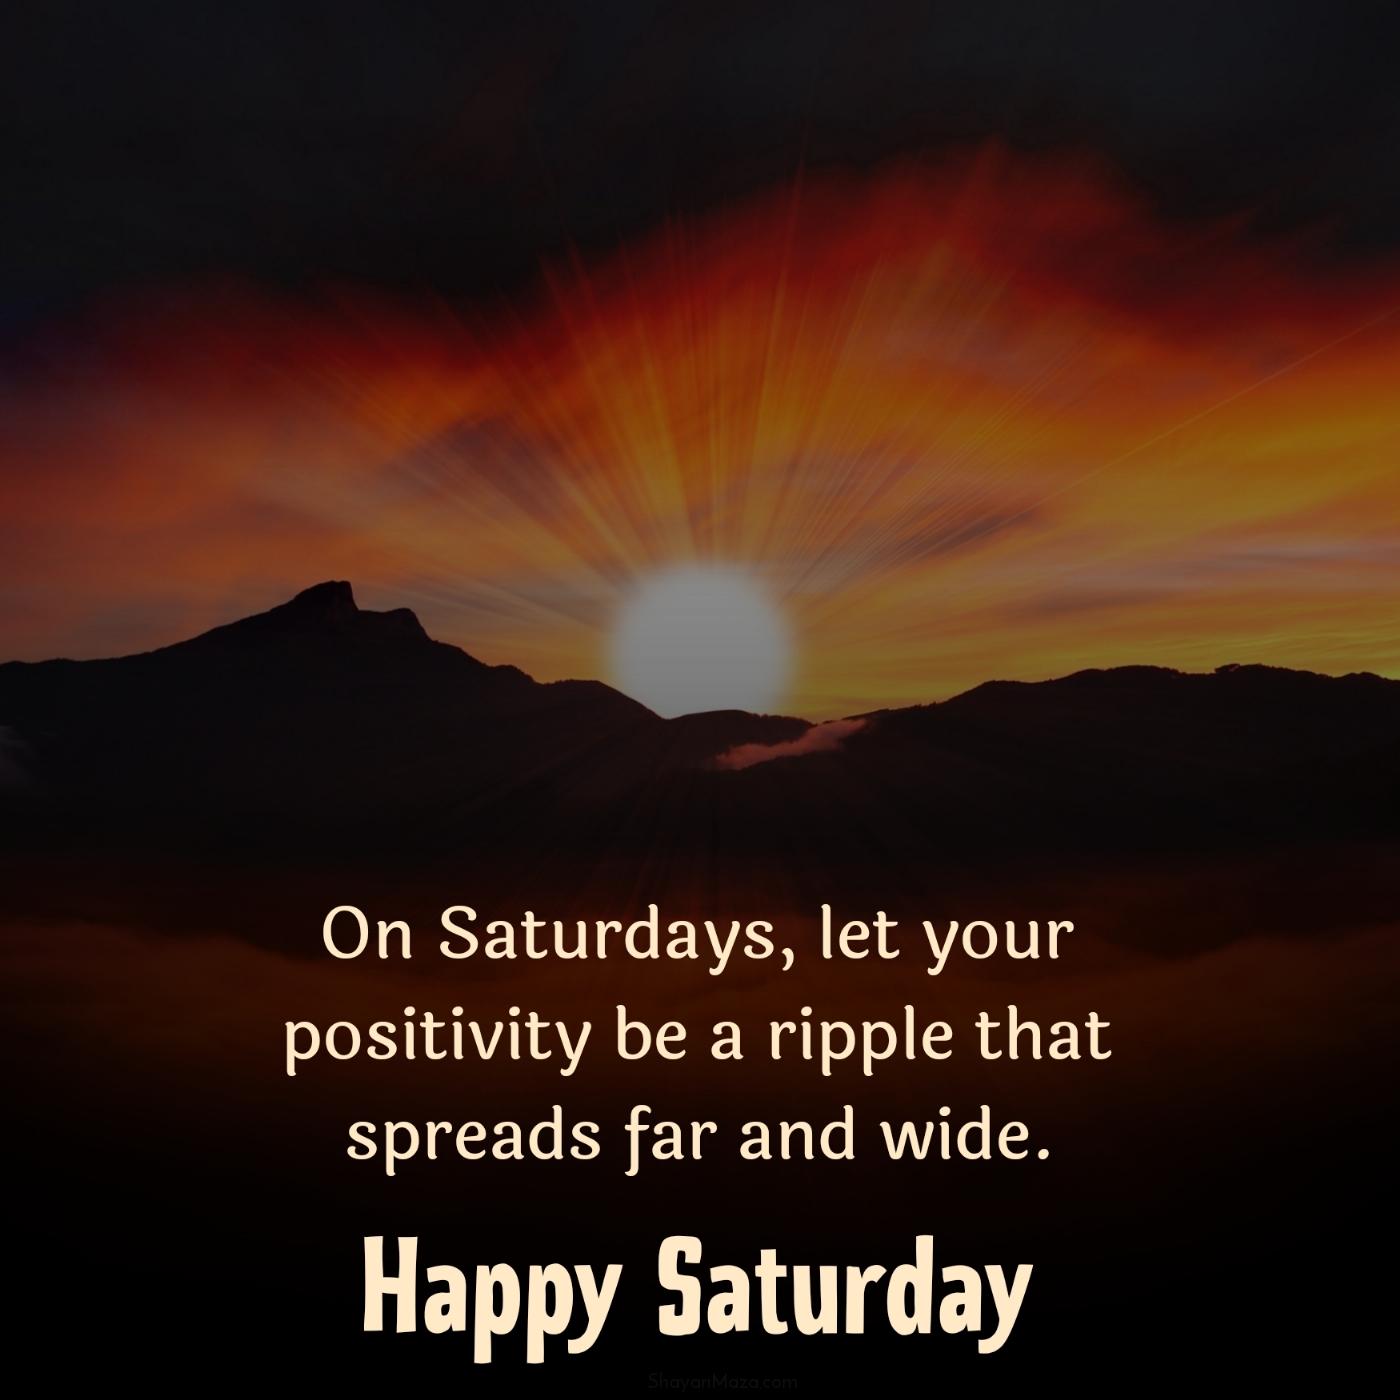 On Saturdays let your positivity be a ripple that spreads far